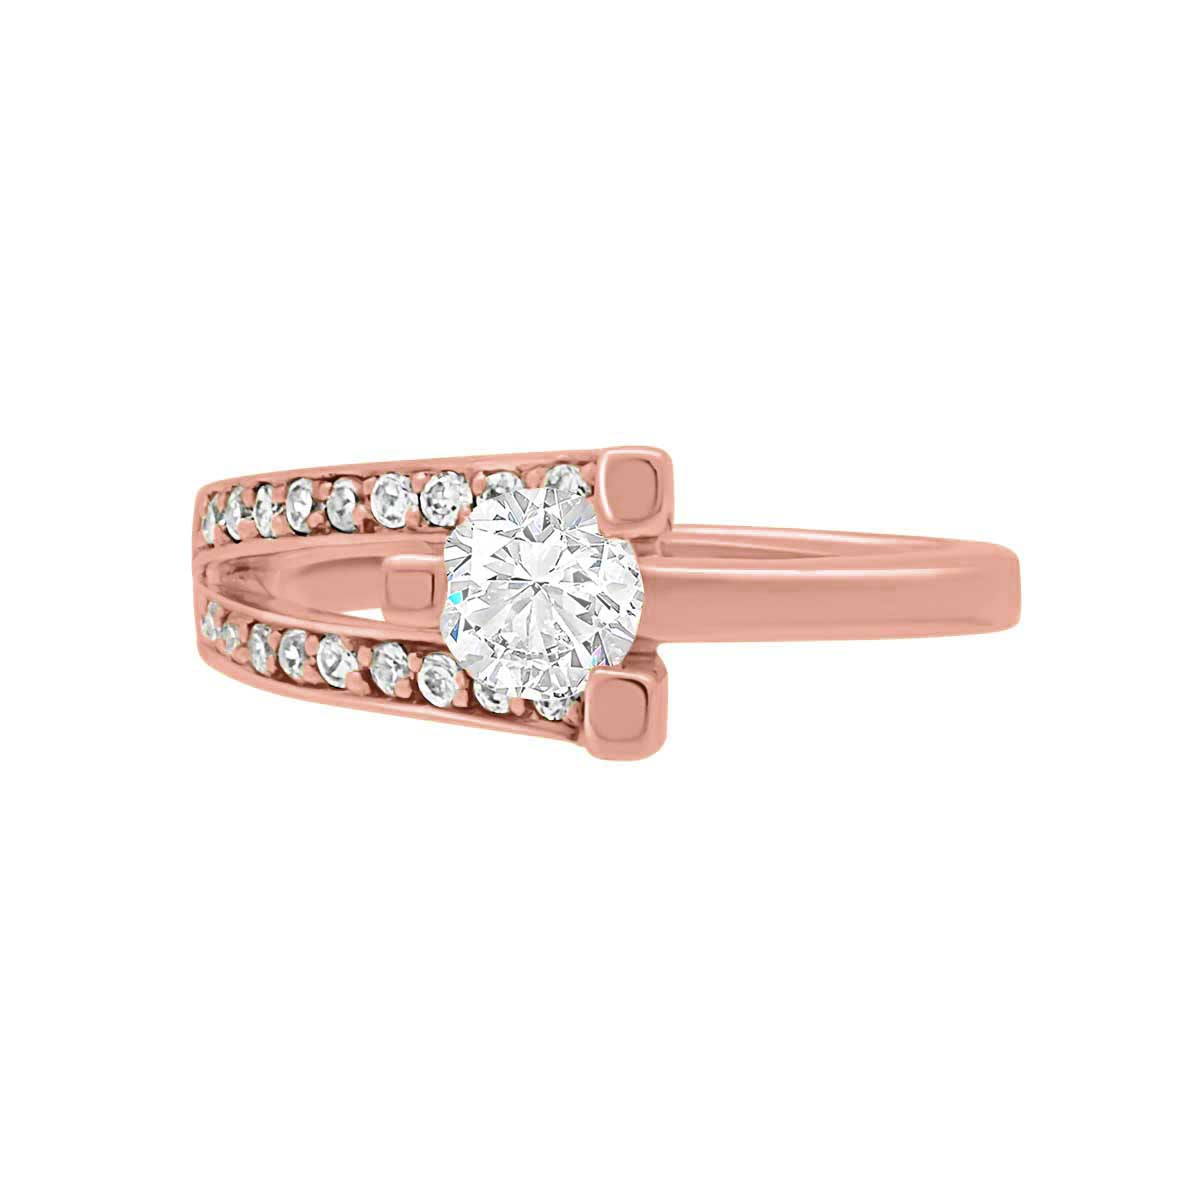 Unusual Diamond Engagement Ring Set in rose Gold